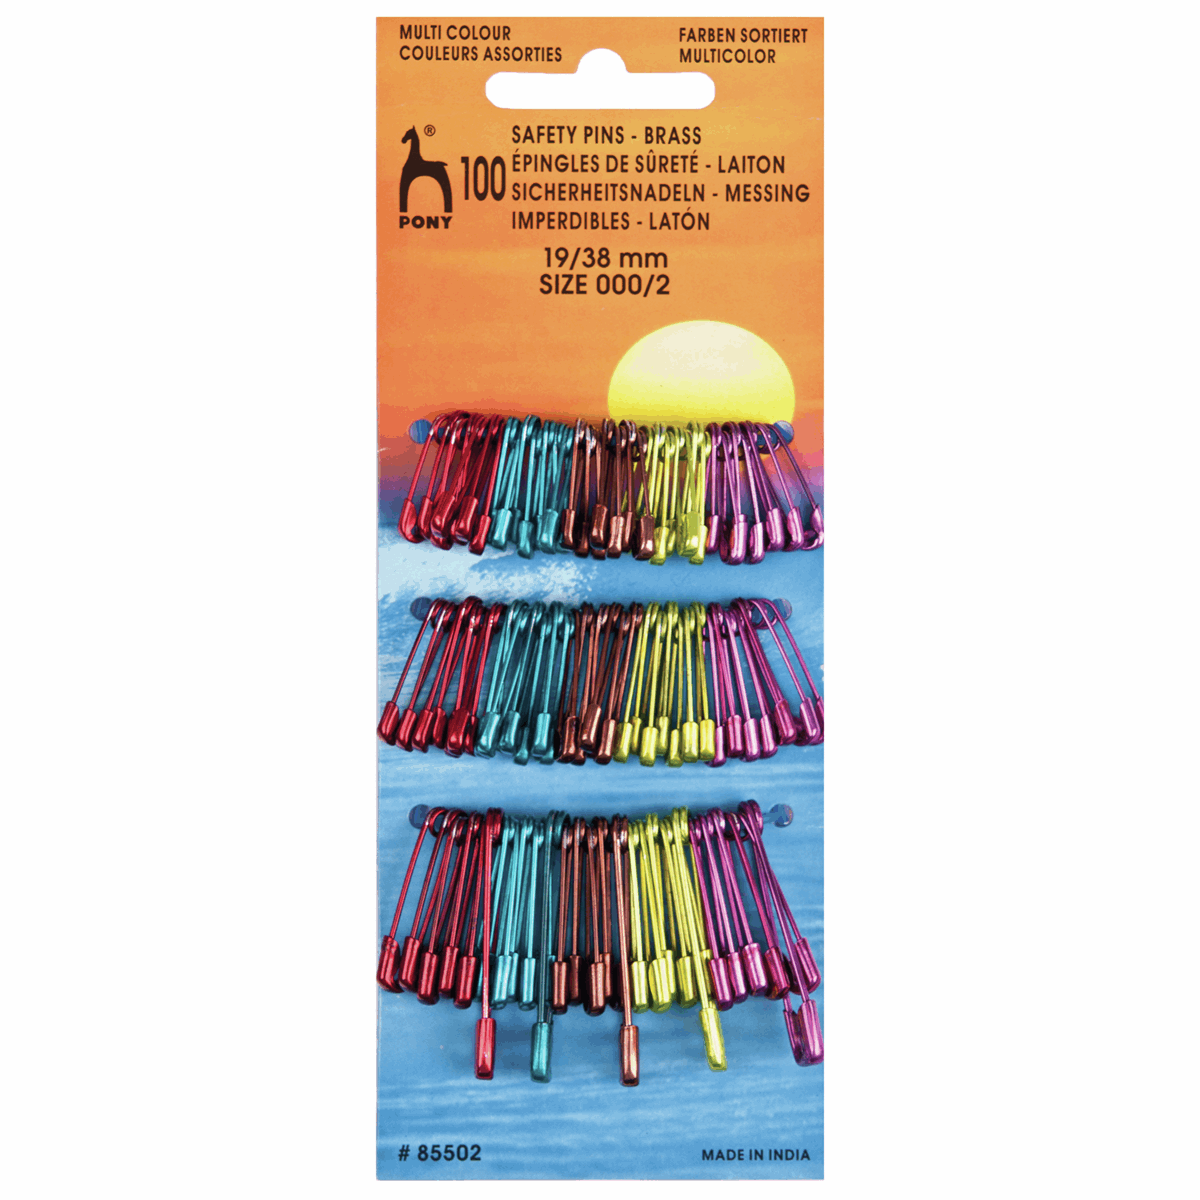 Safety Pins Multi Coloured 100 Assorted, Sizes 000/2, 19/38mm